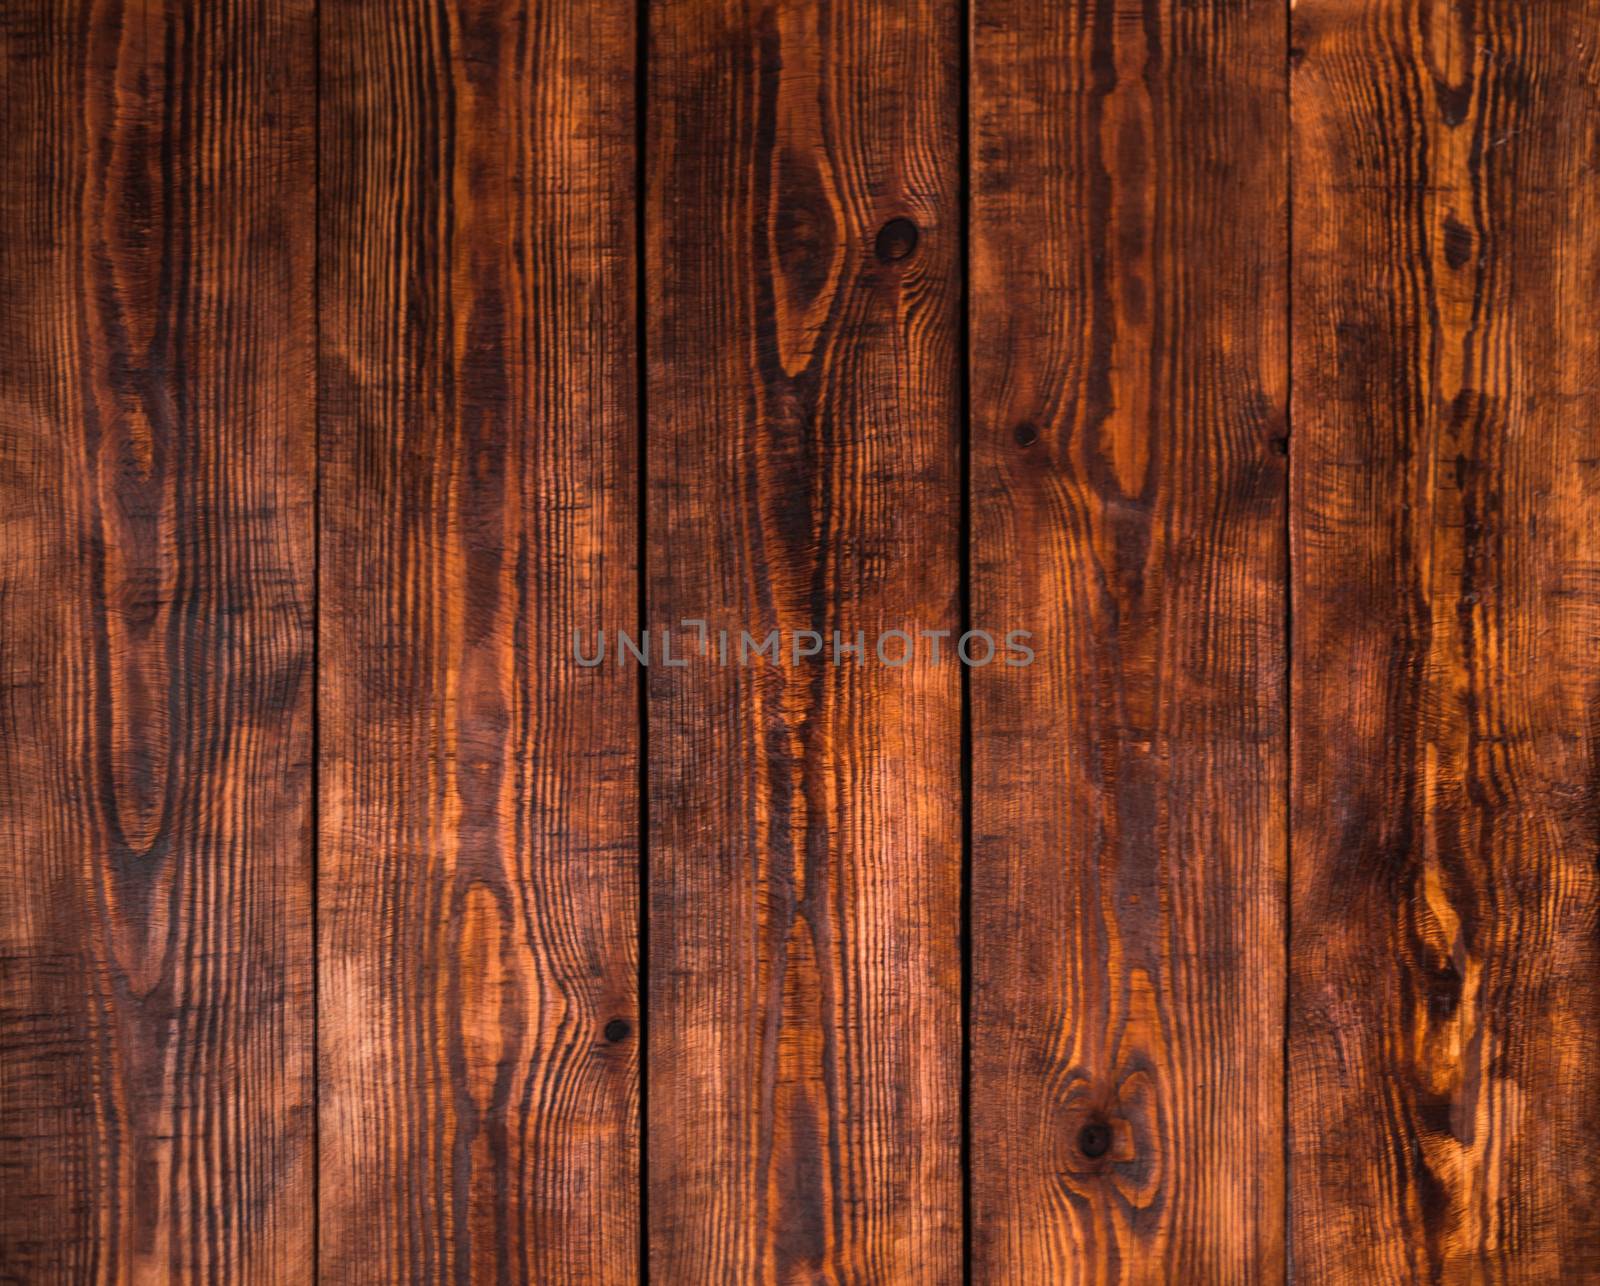 Old wooden floor with cracks and scratches by Seva_blsv